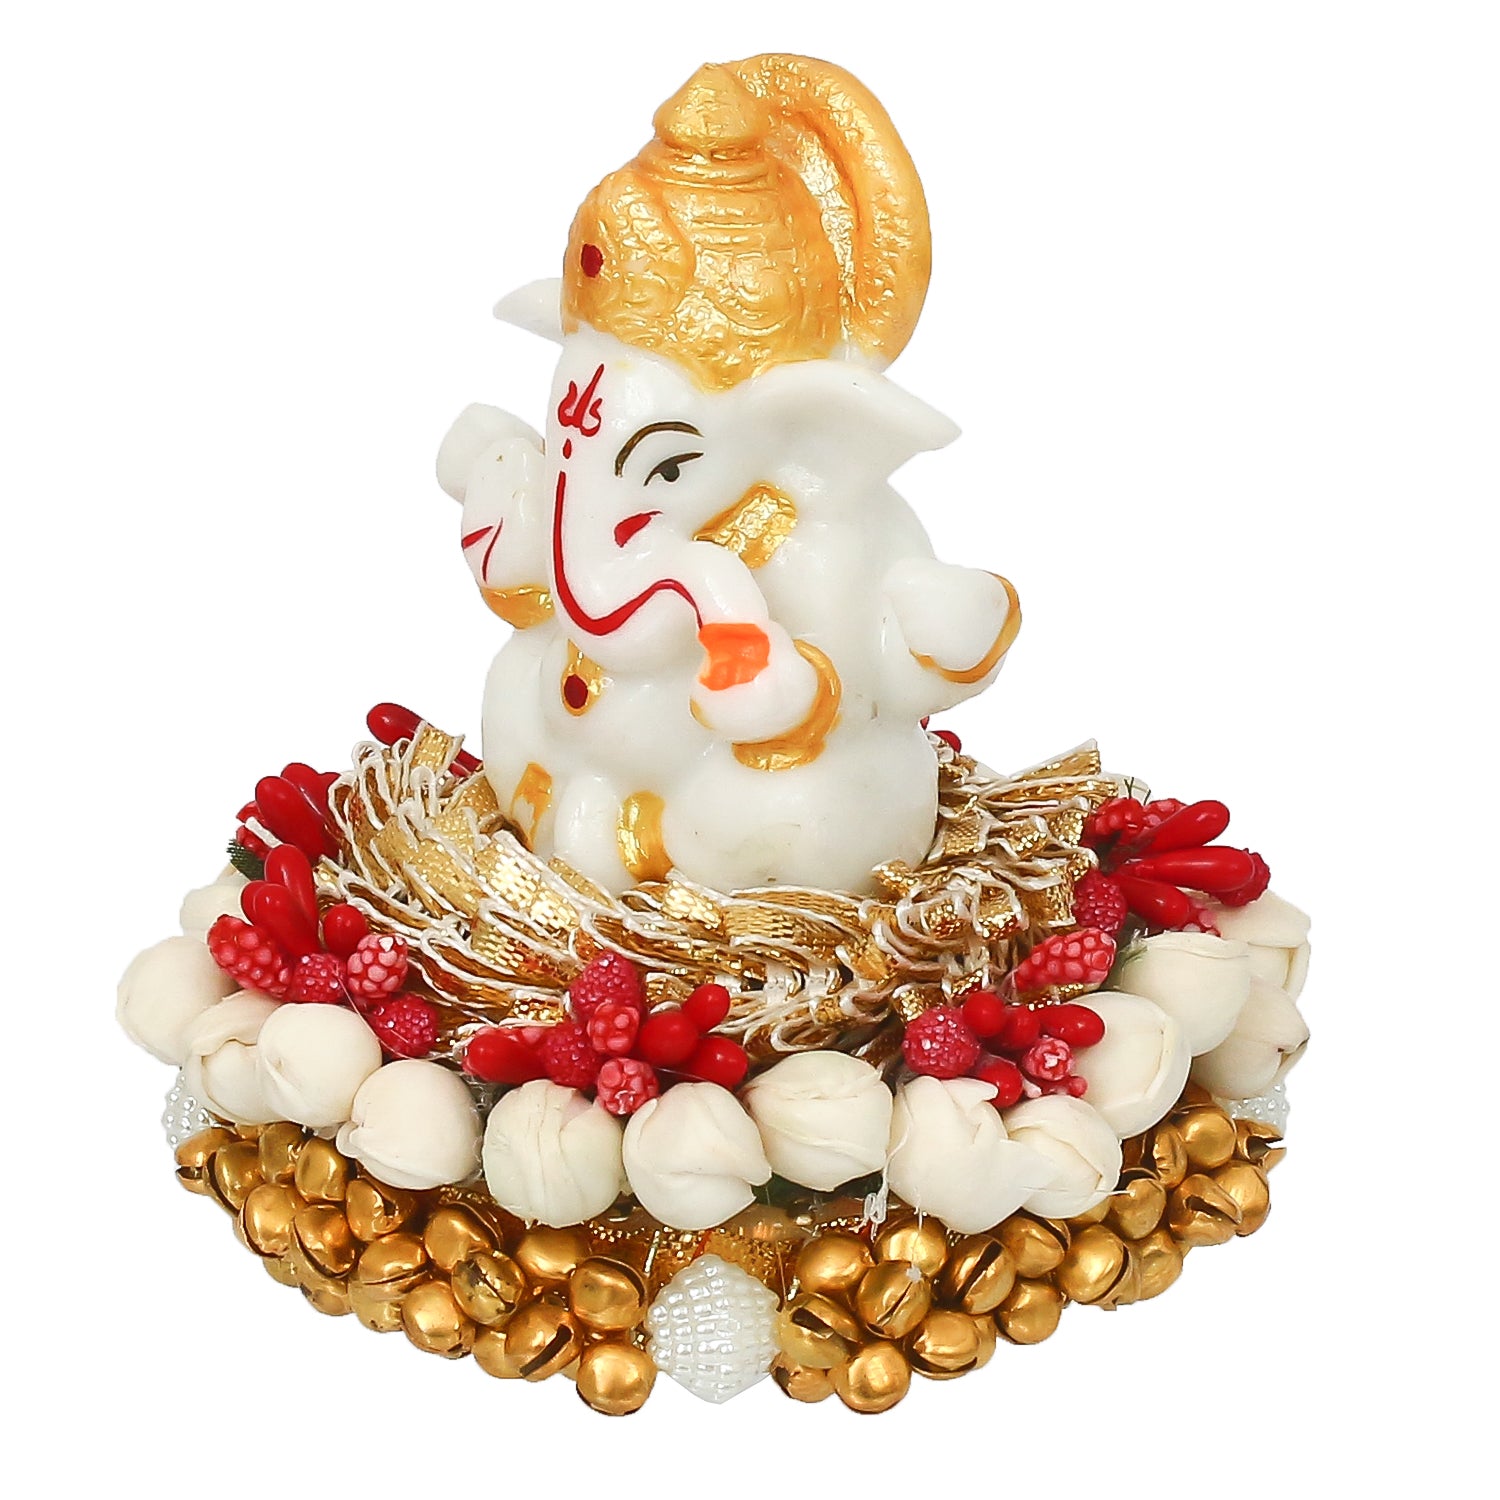 Polyresin Ganesha Idol on Decorative Handcrafted Plate for Home and Car Dashboard 4